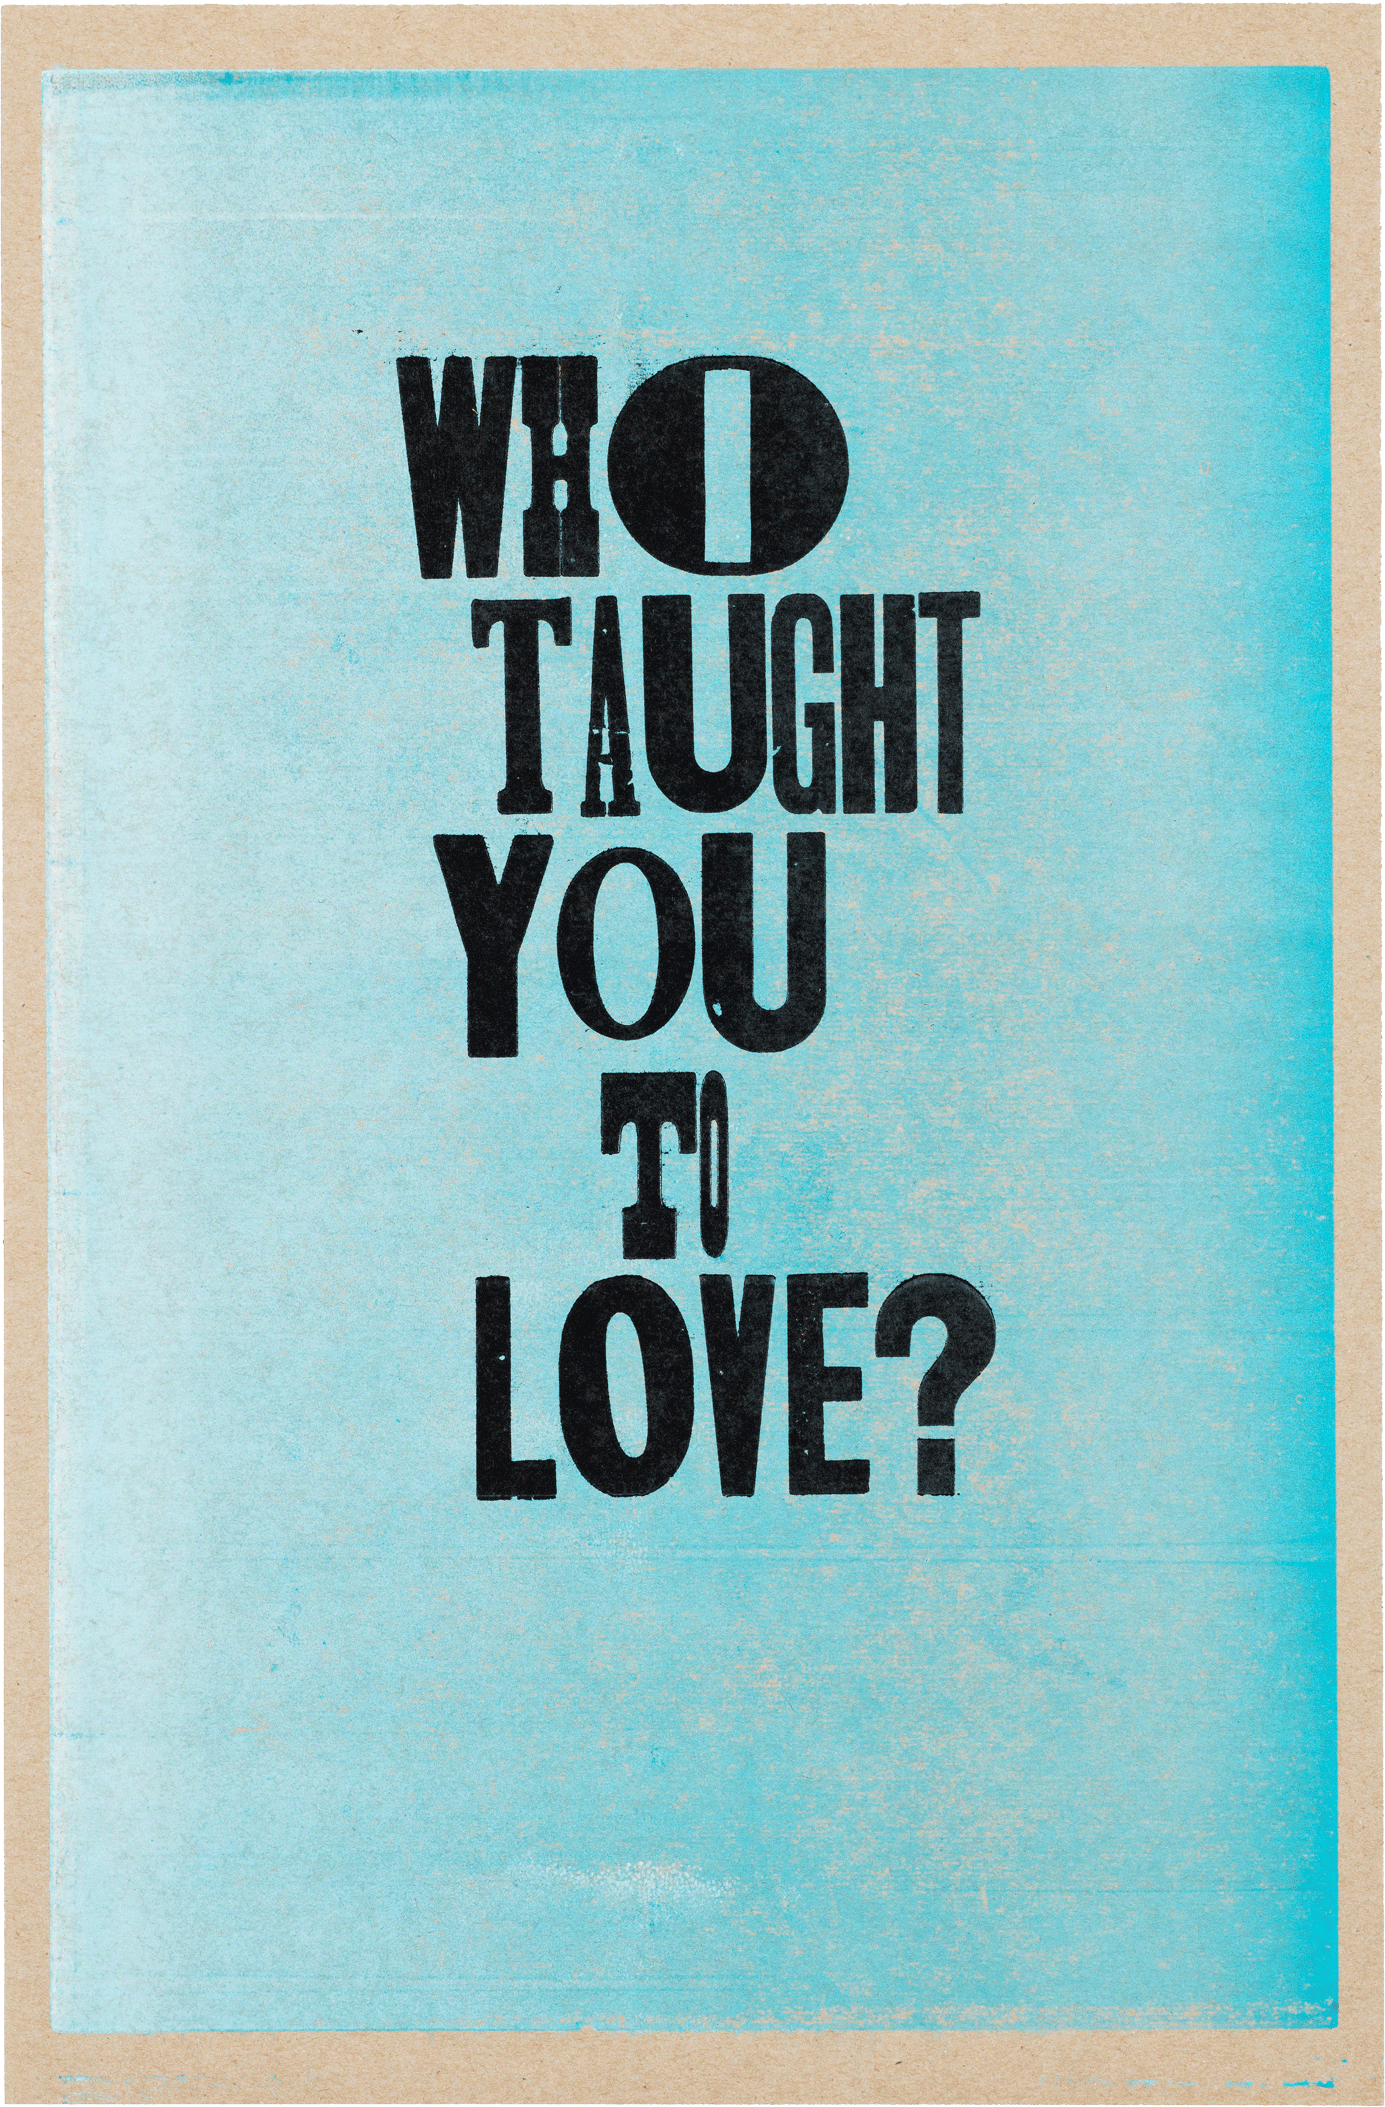 Image description: turquoise blue rectangle with the wood-blocked words “Who taught you to love?” Art by Kennedy Prints